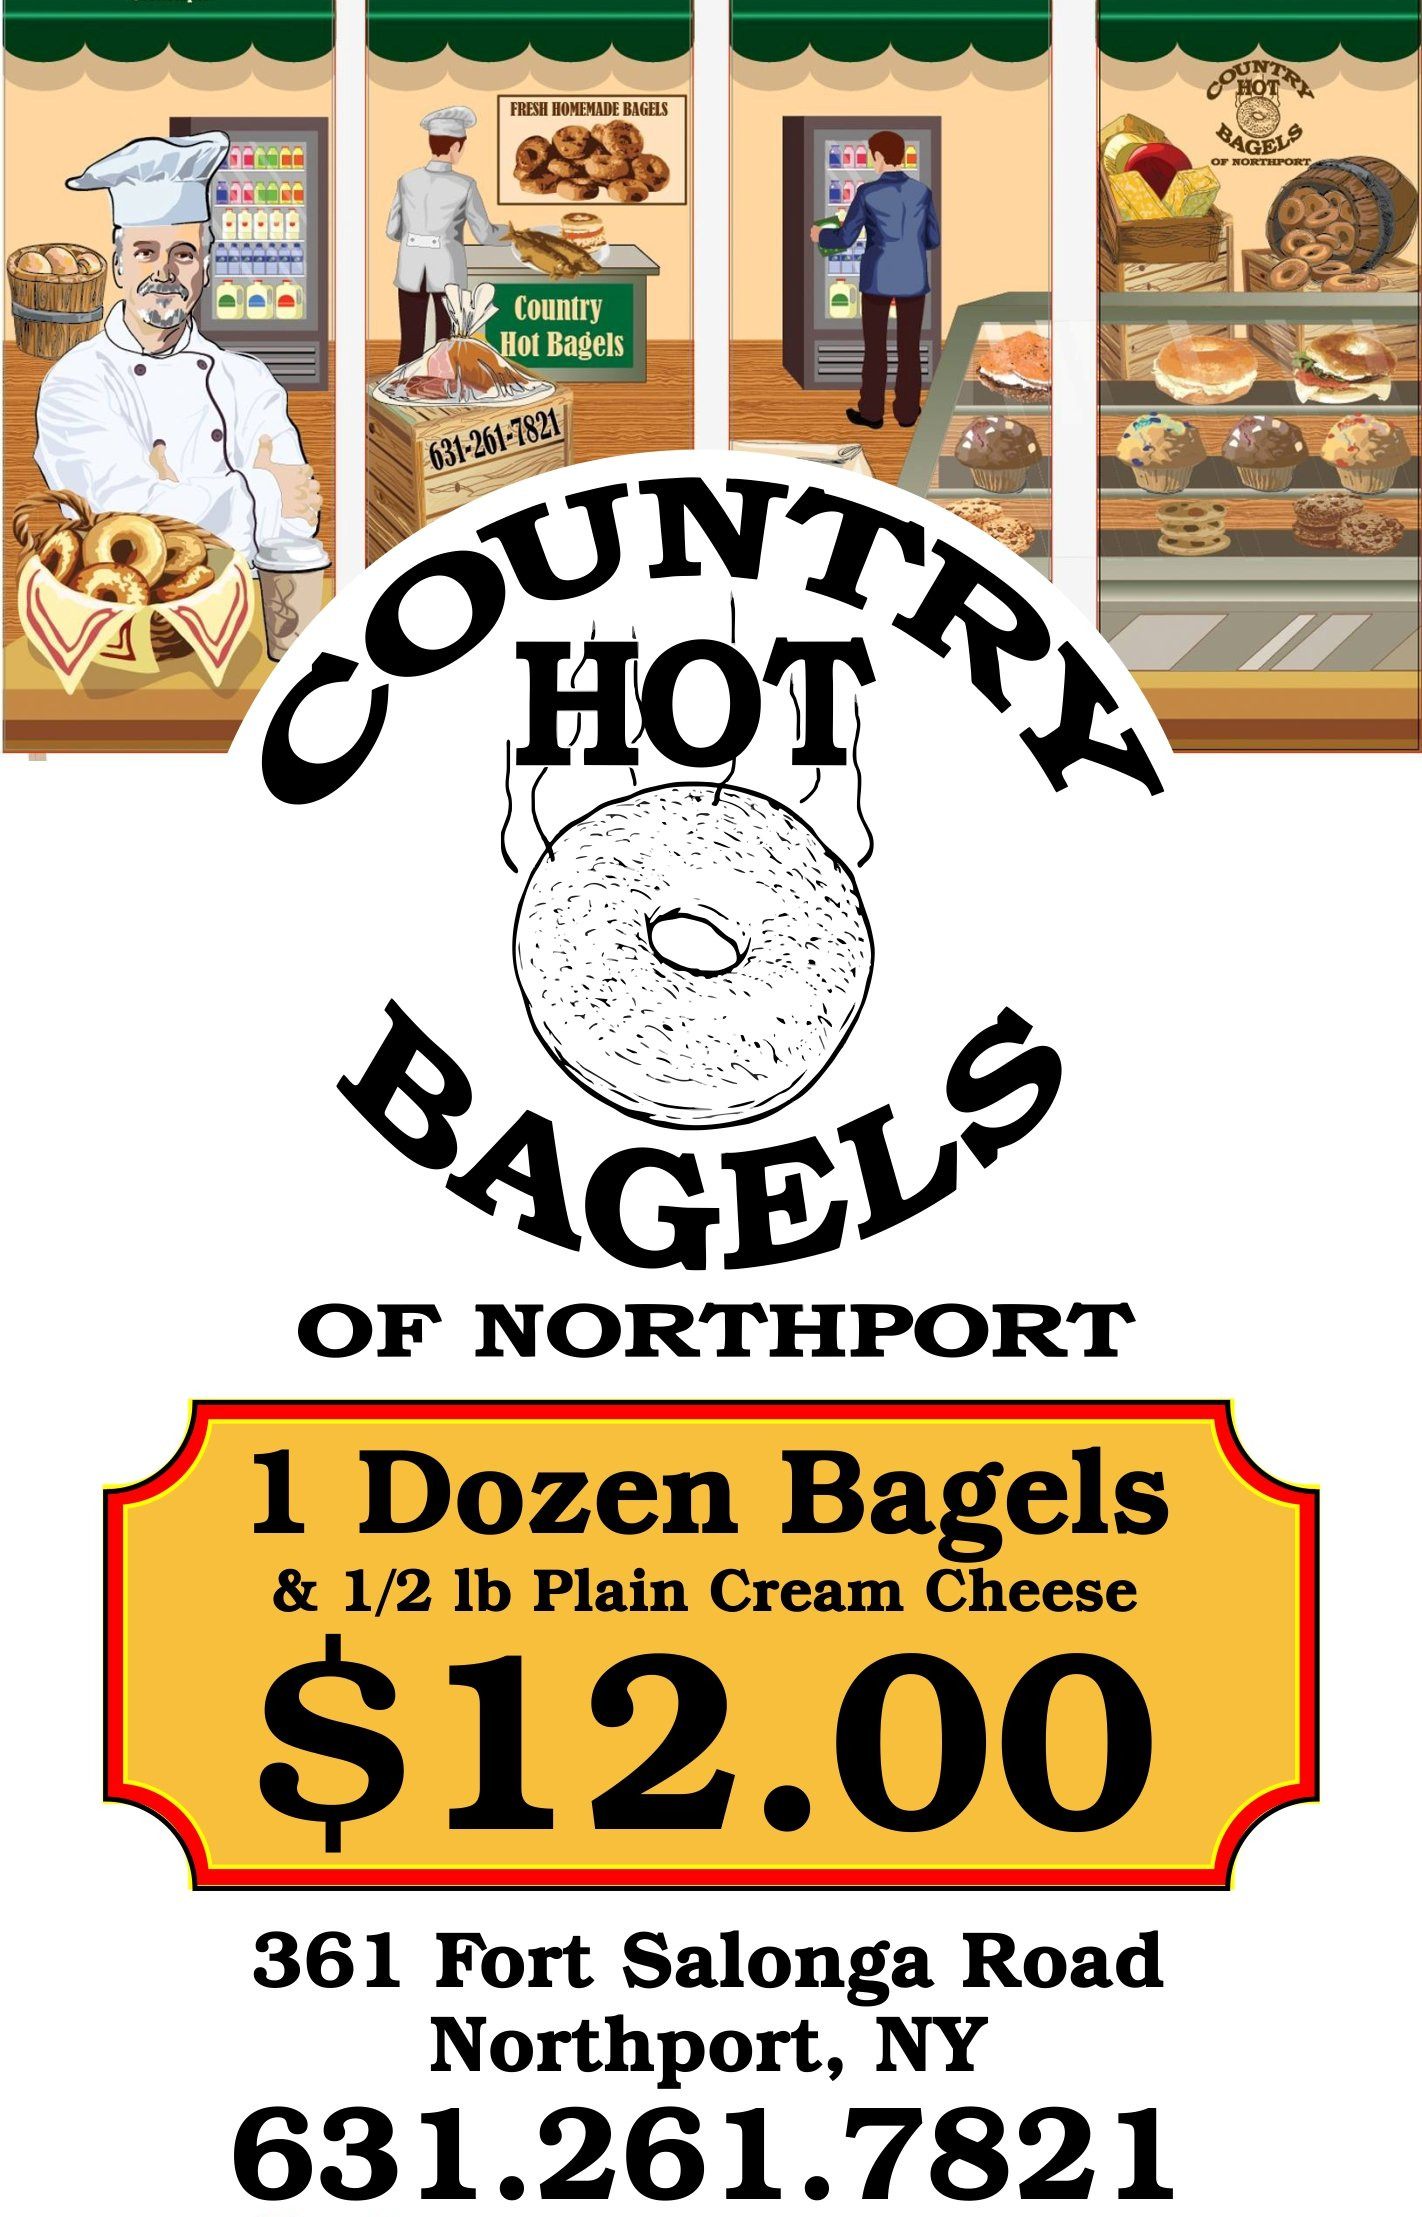 An advertisement for country hot bagels of northport